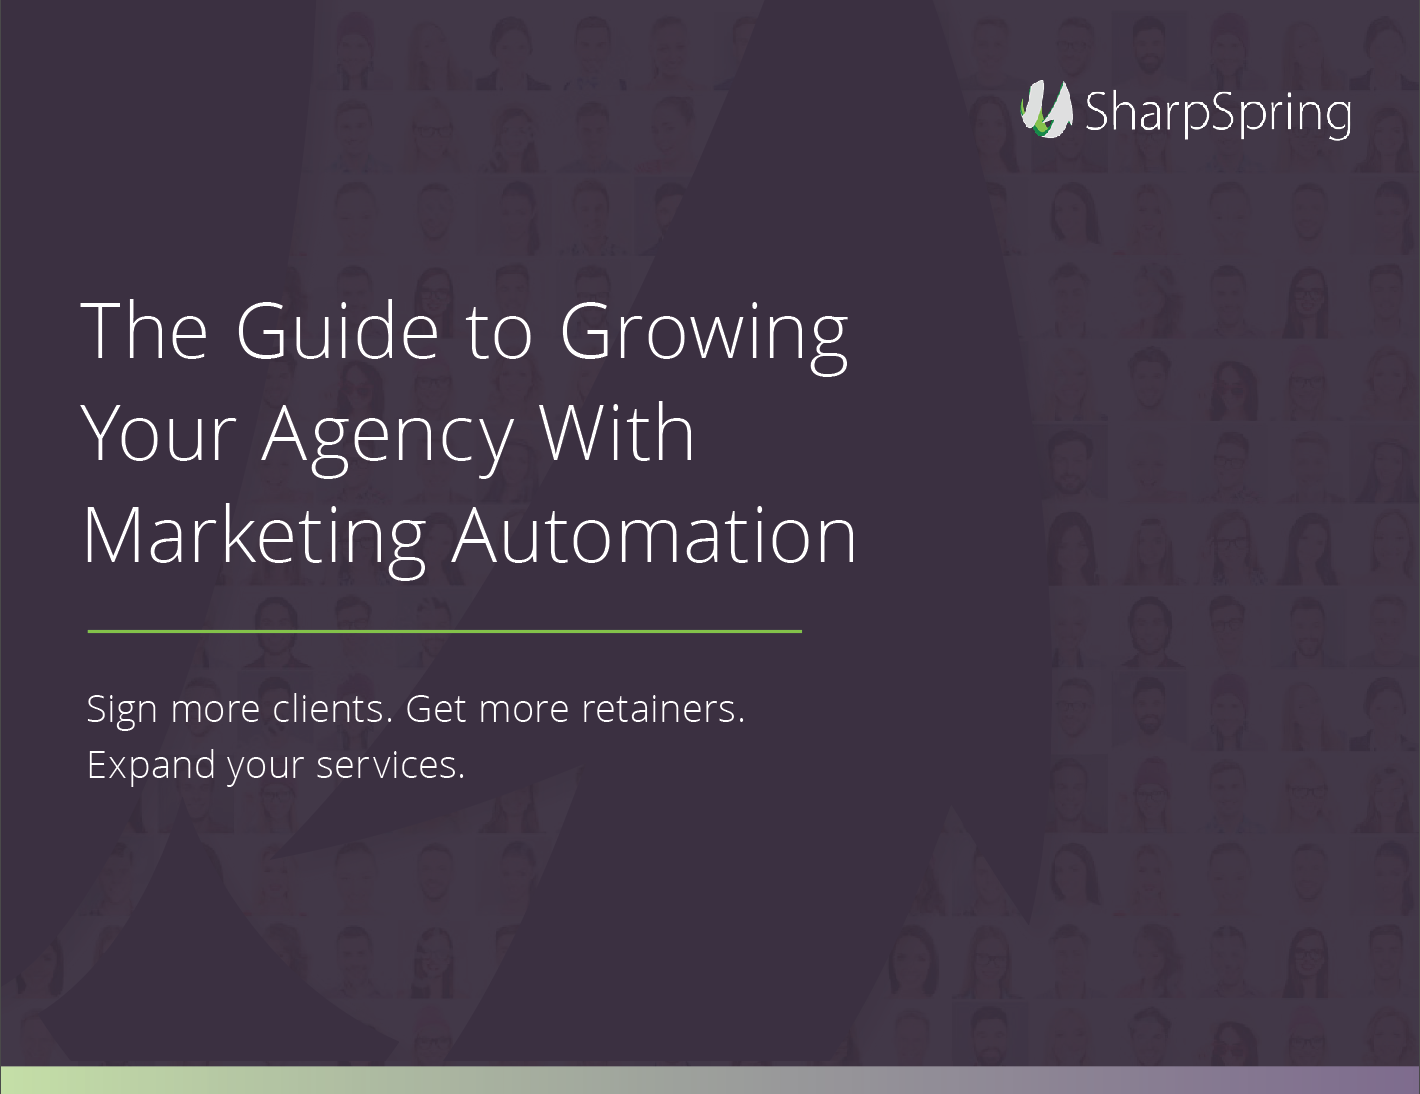 The Guide to Growing Your Agency With Marketing Automation